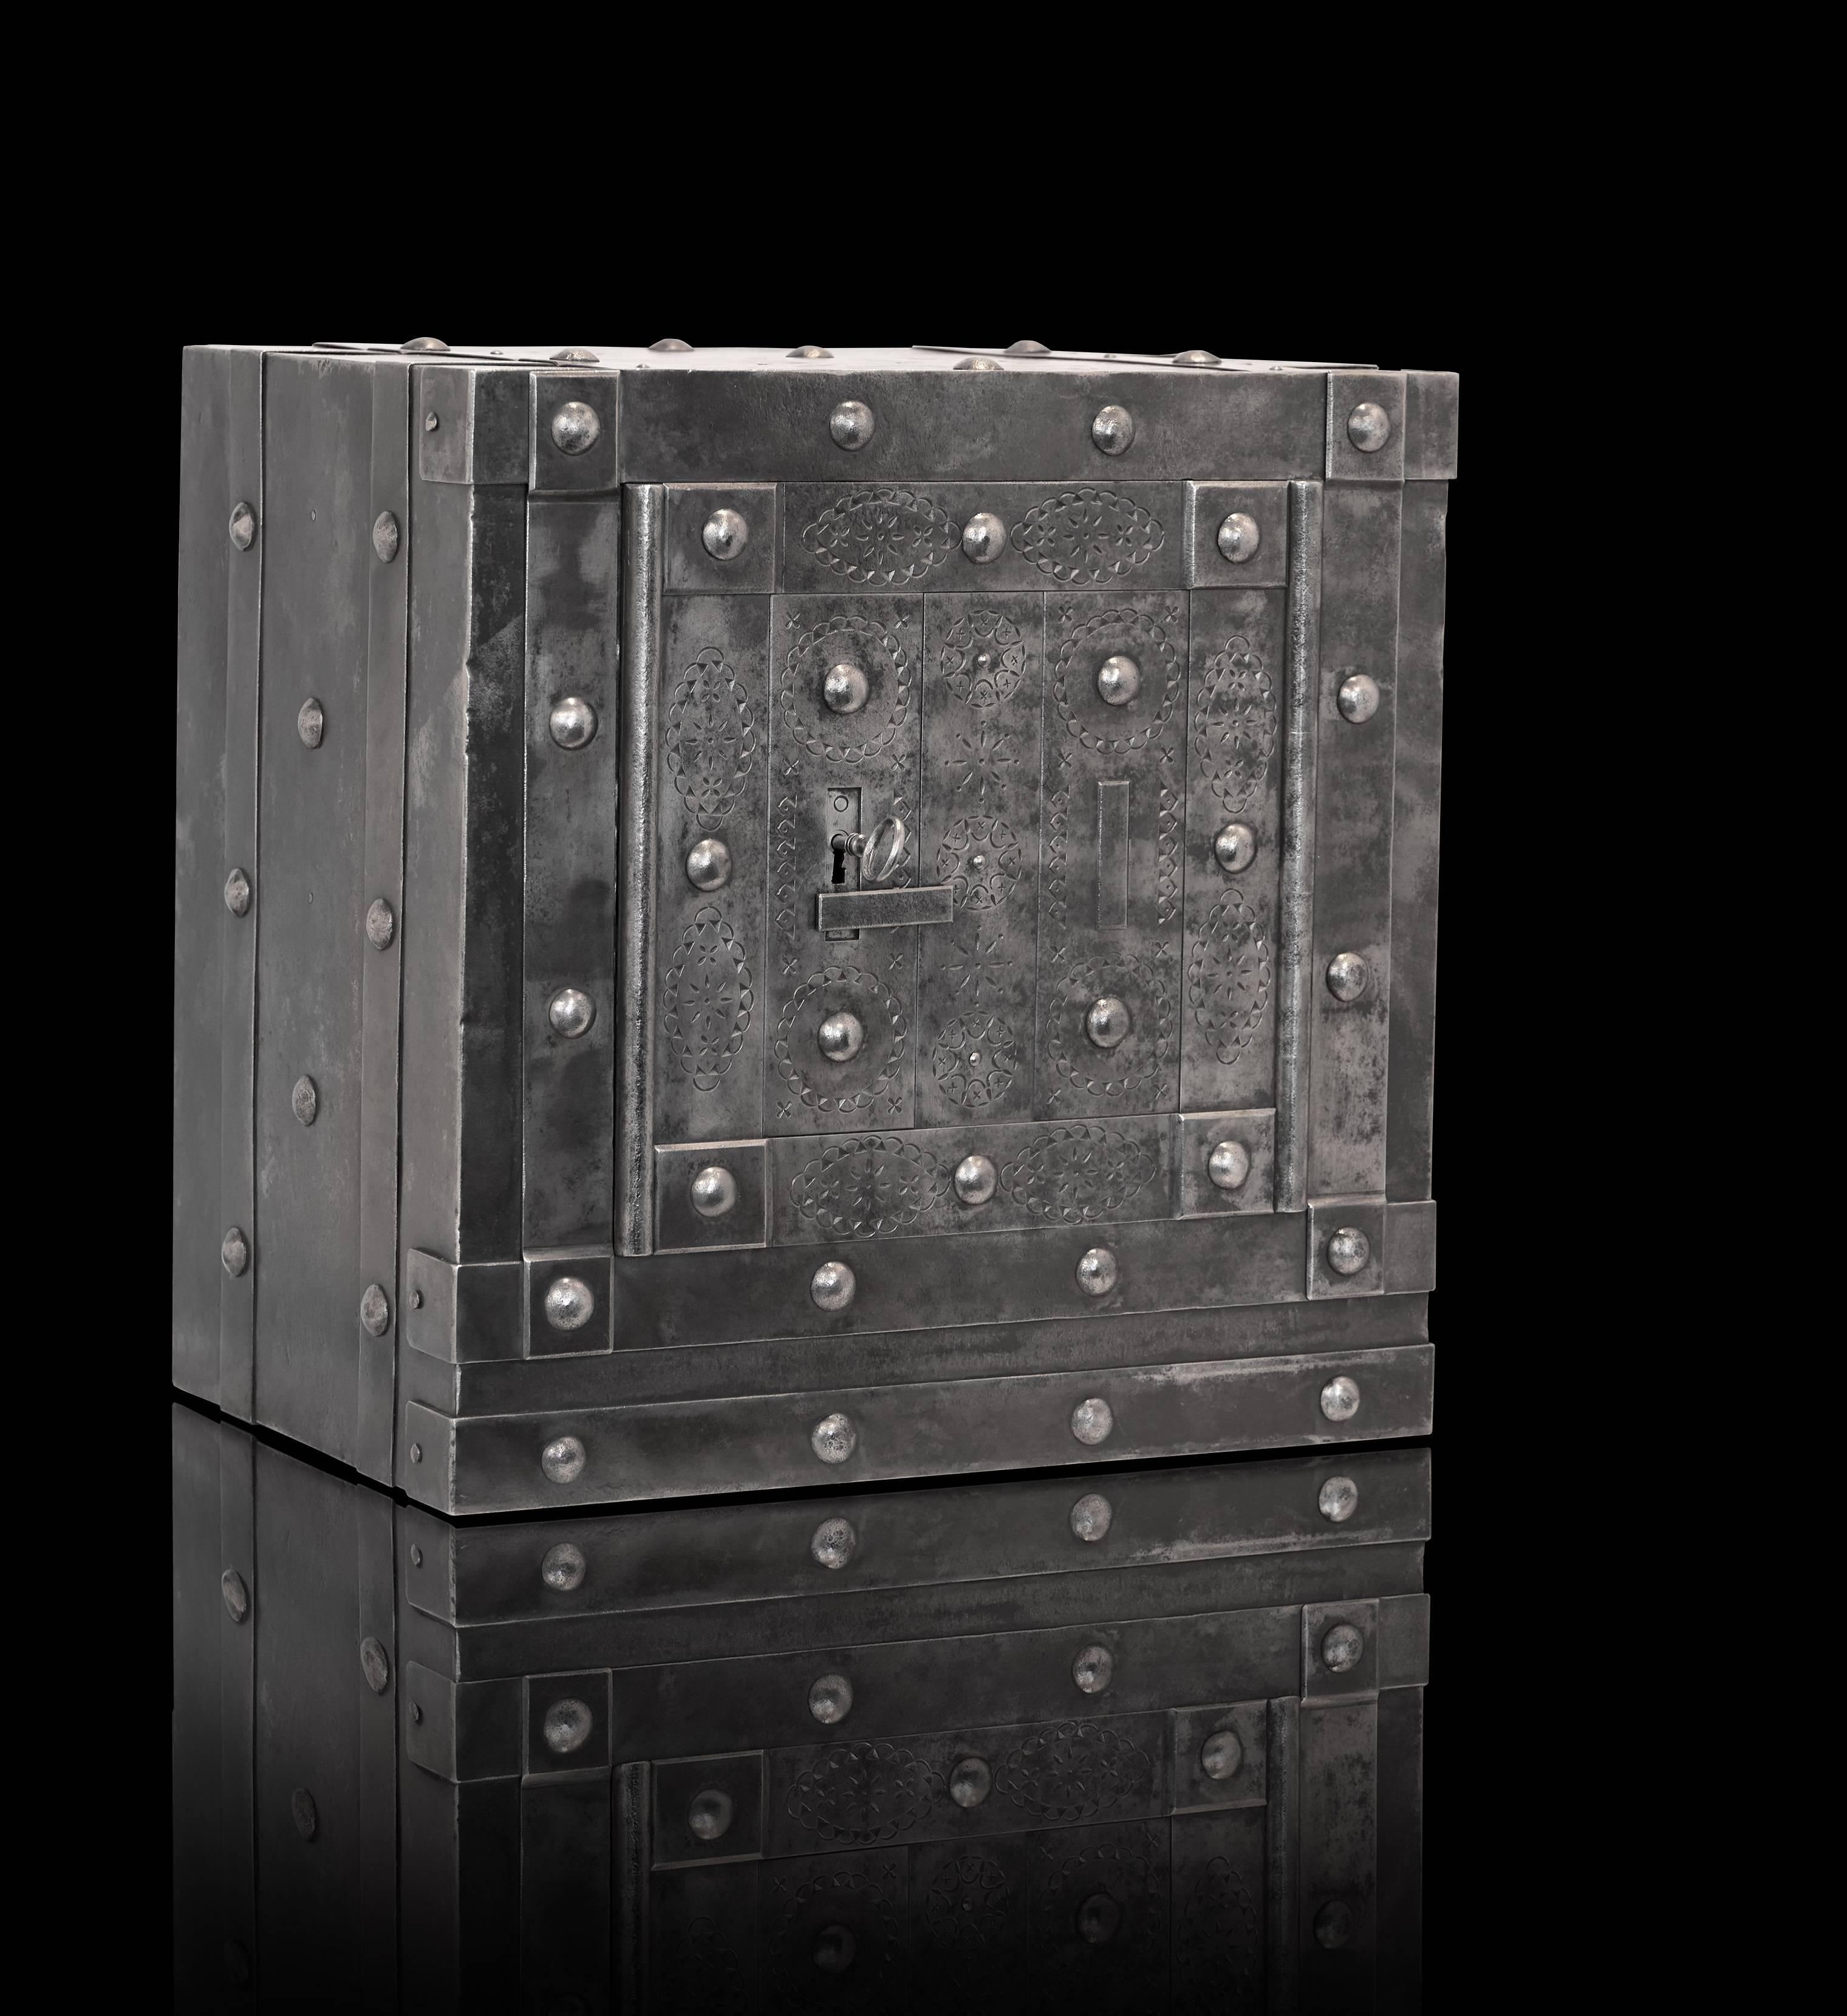 Small hobnail safe, desk top size, circa 1840. This safe has an original and working key lock door, with a hidden release to expose the key hole and a secret sequence to follow with the key to activate the double locking mechanism to open the